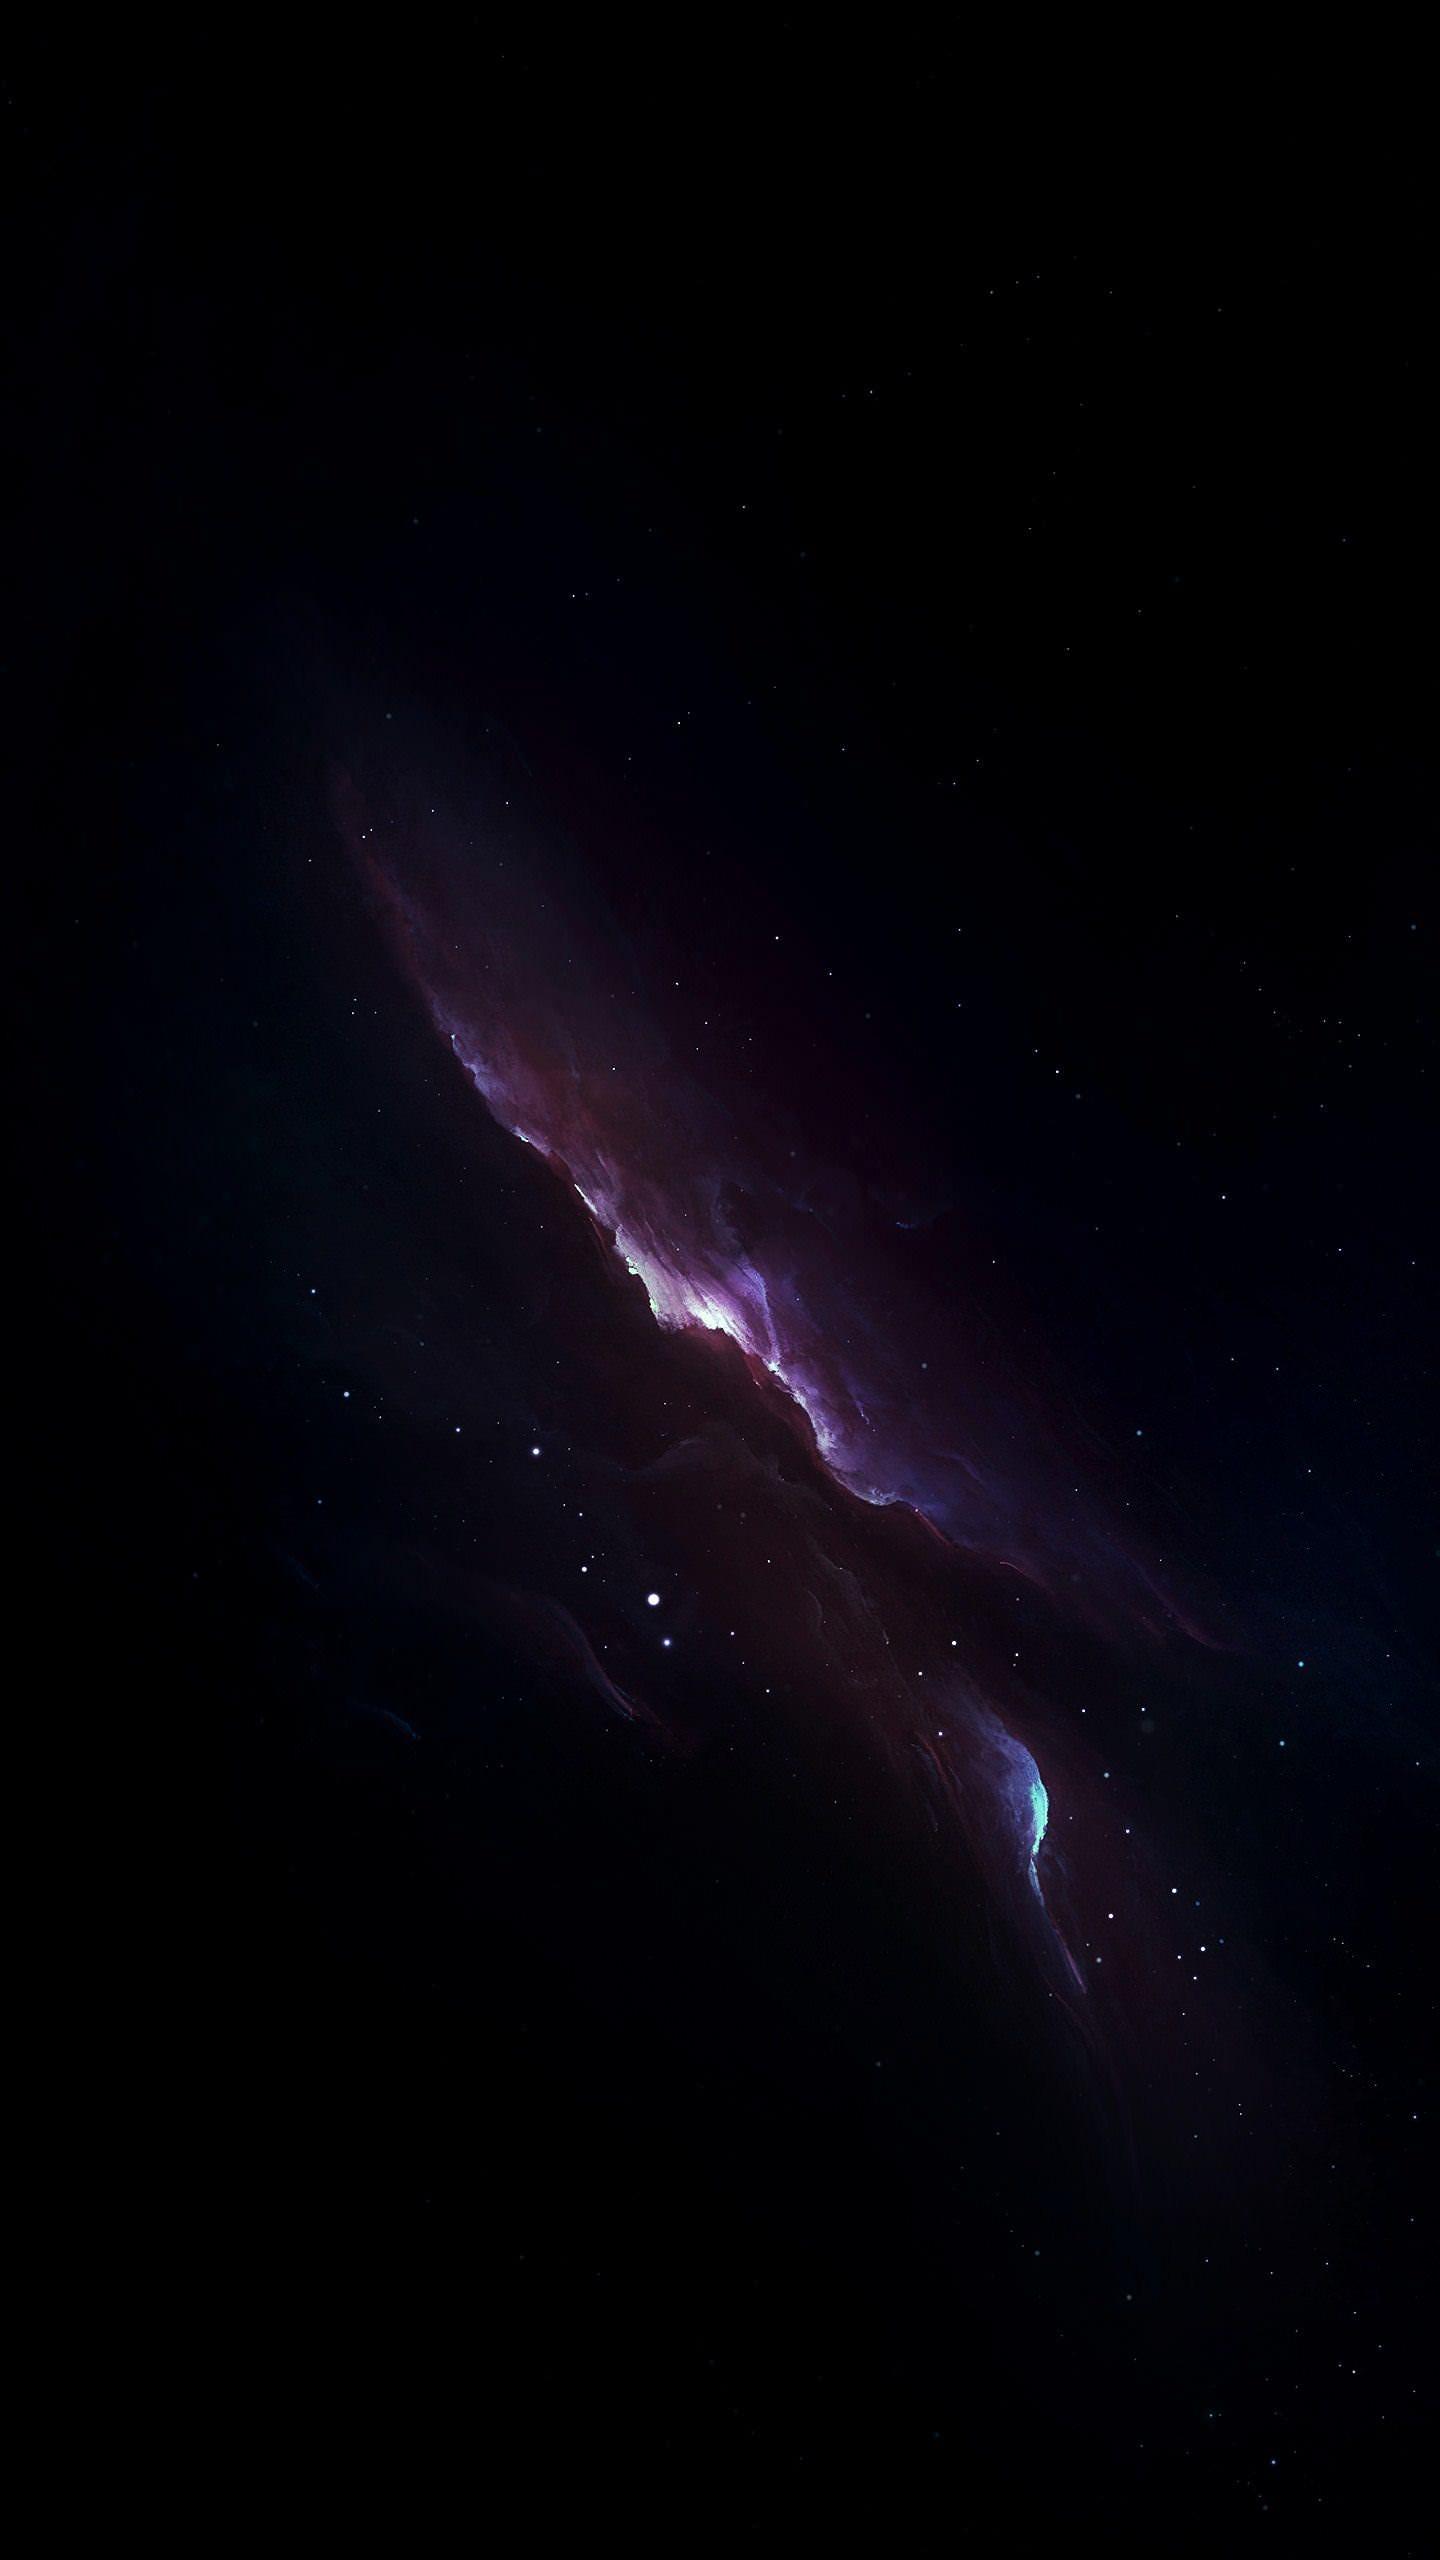 Space Amoled Wallpapers - Wallpaper Cave